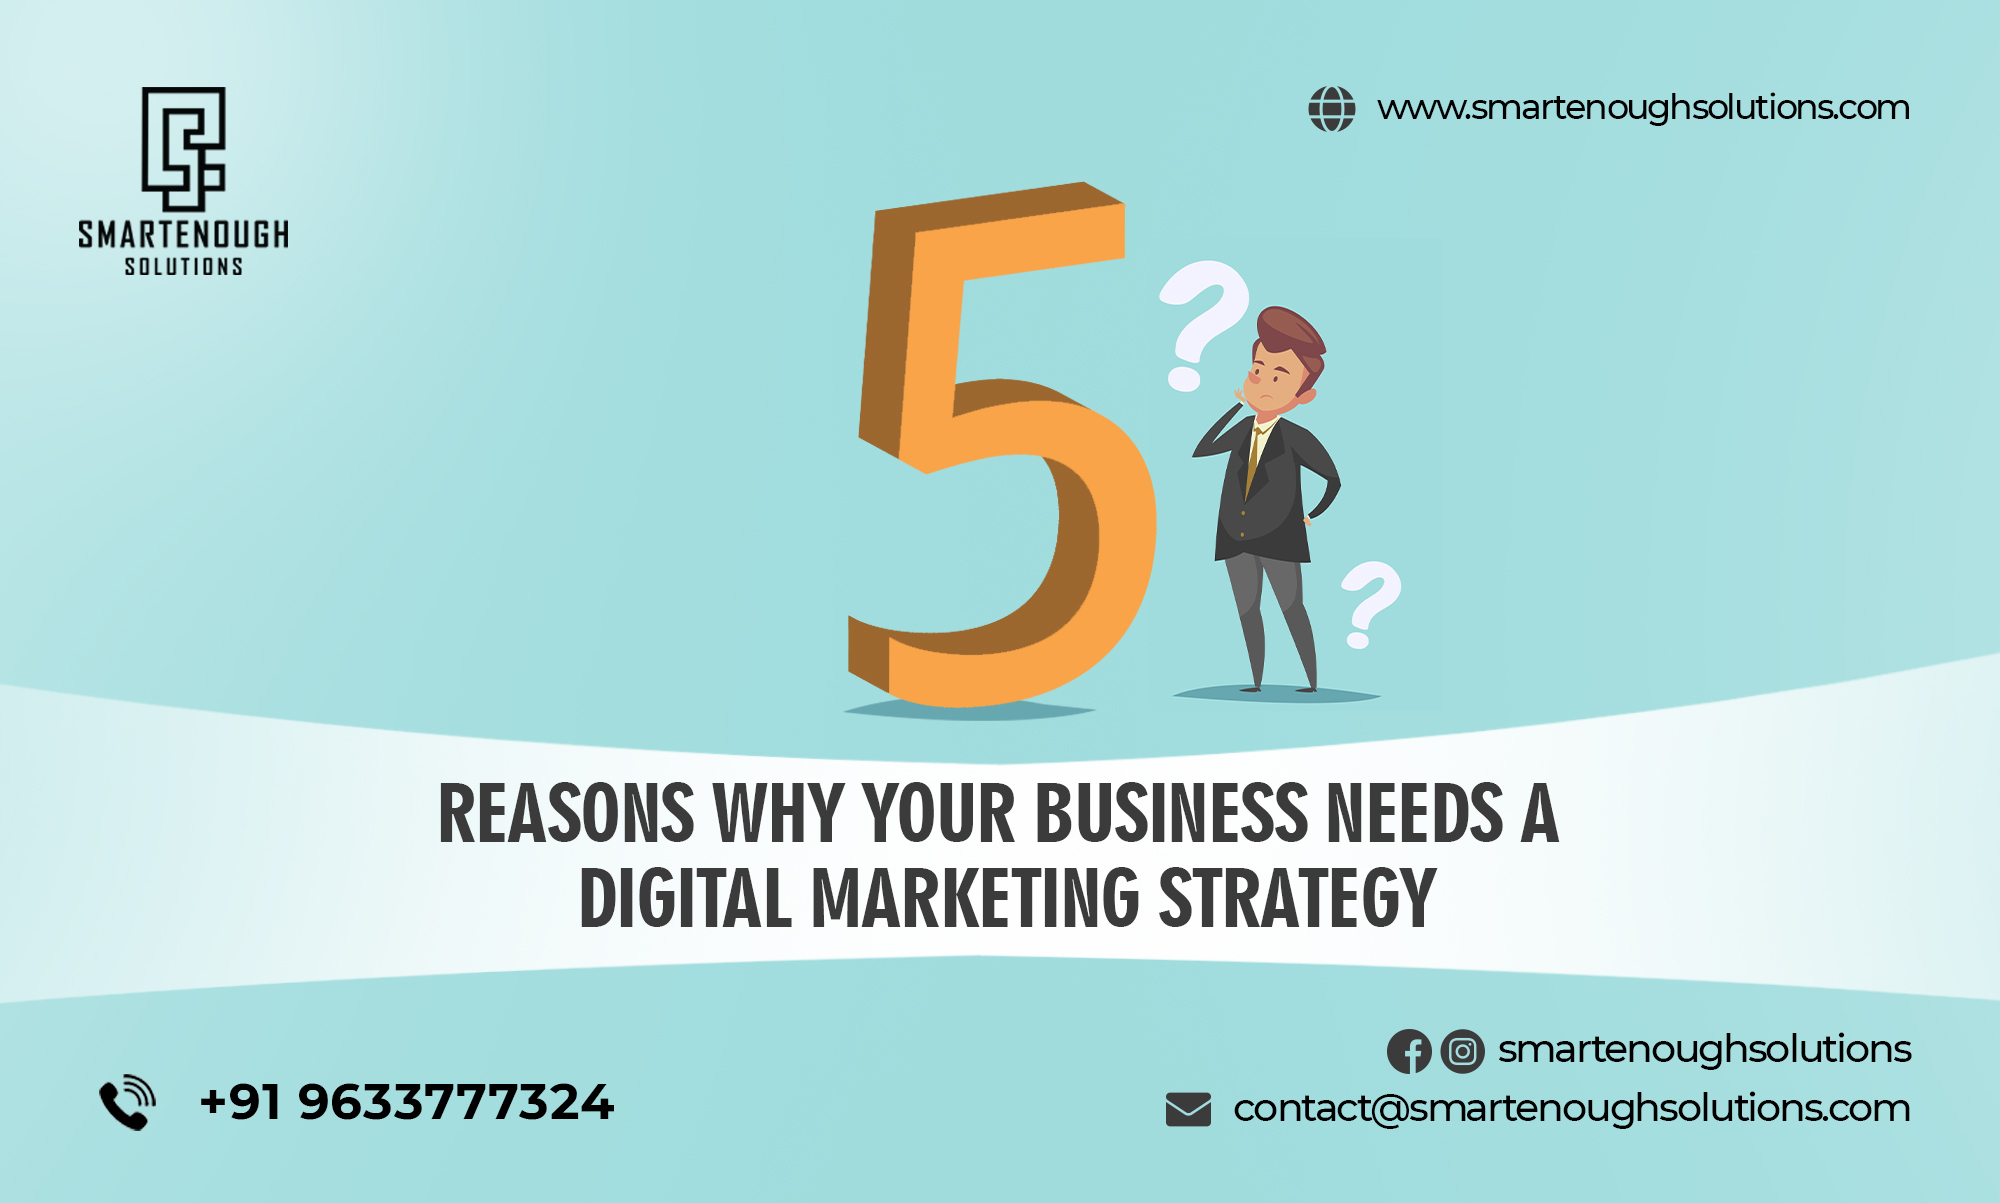 5 Reasons Why Your Business Needs a Digital Marketing Strategy